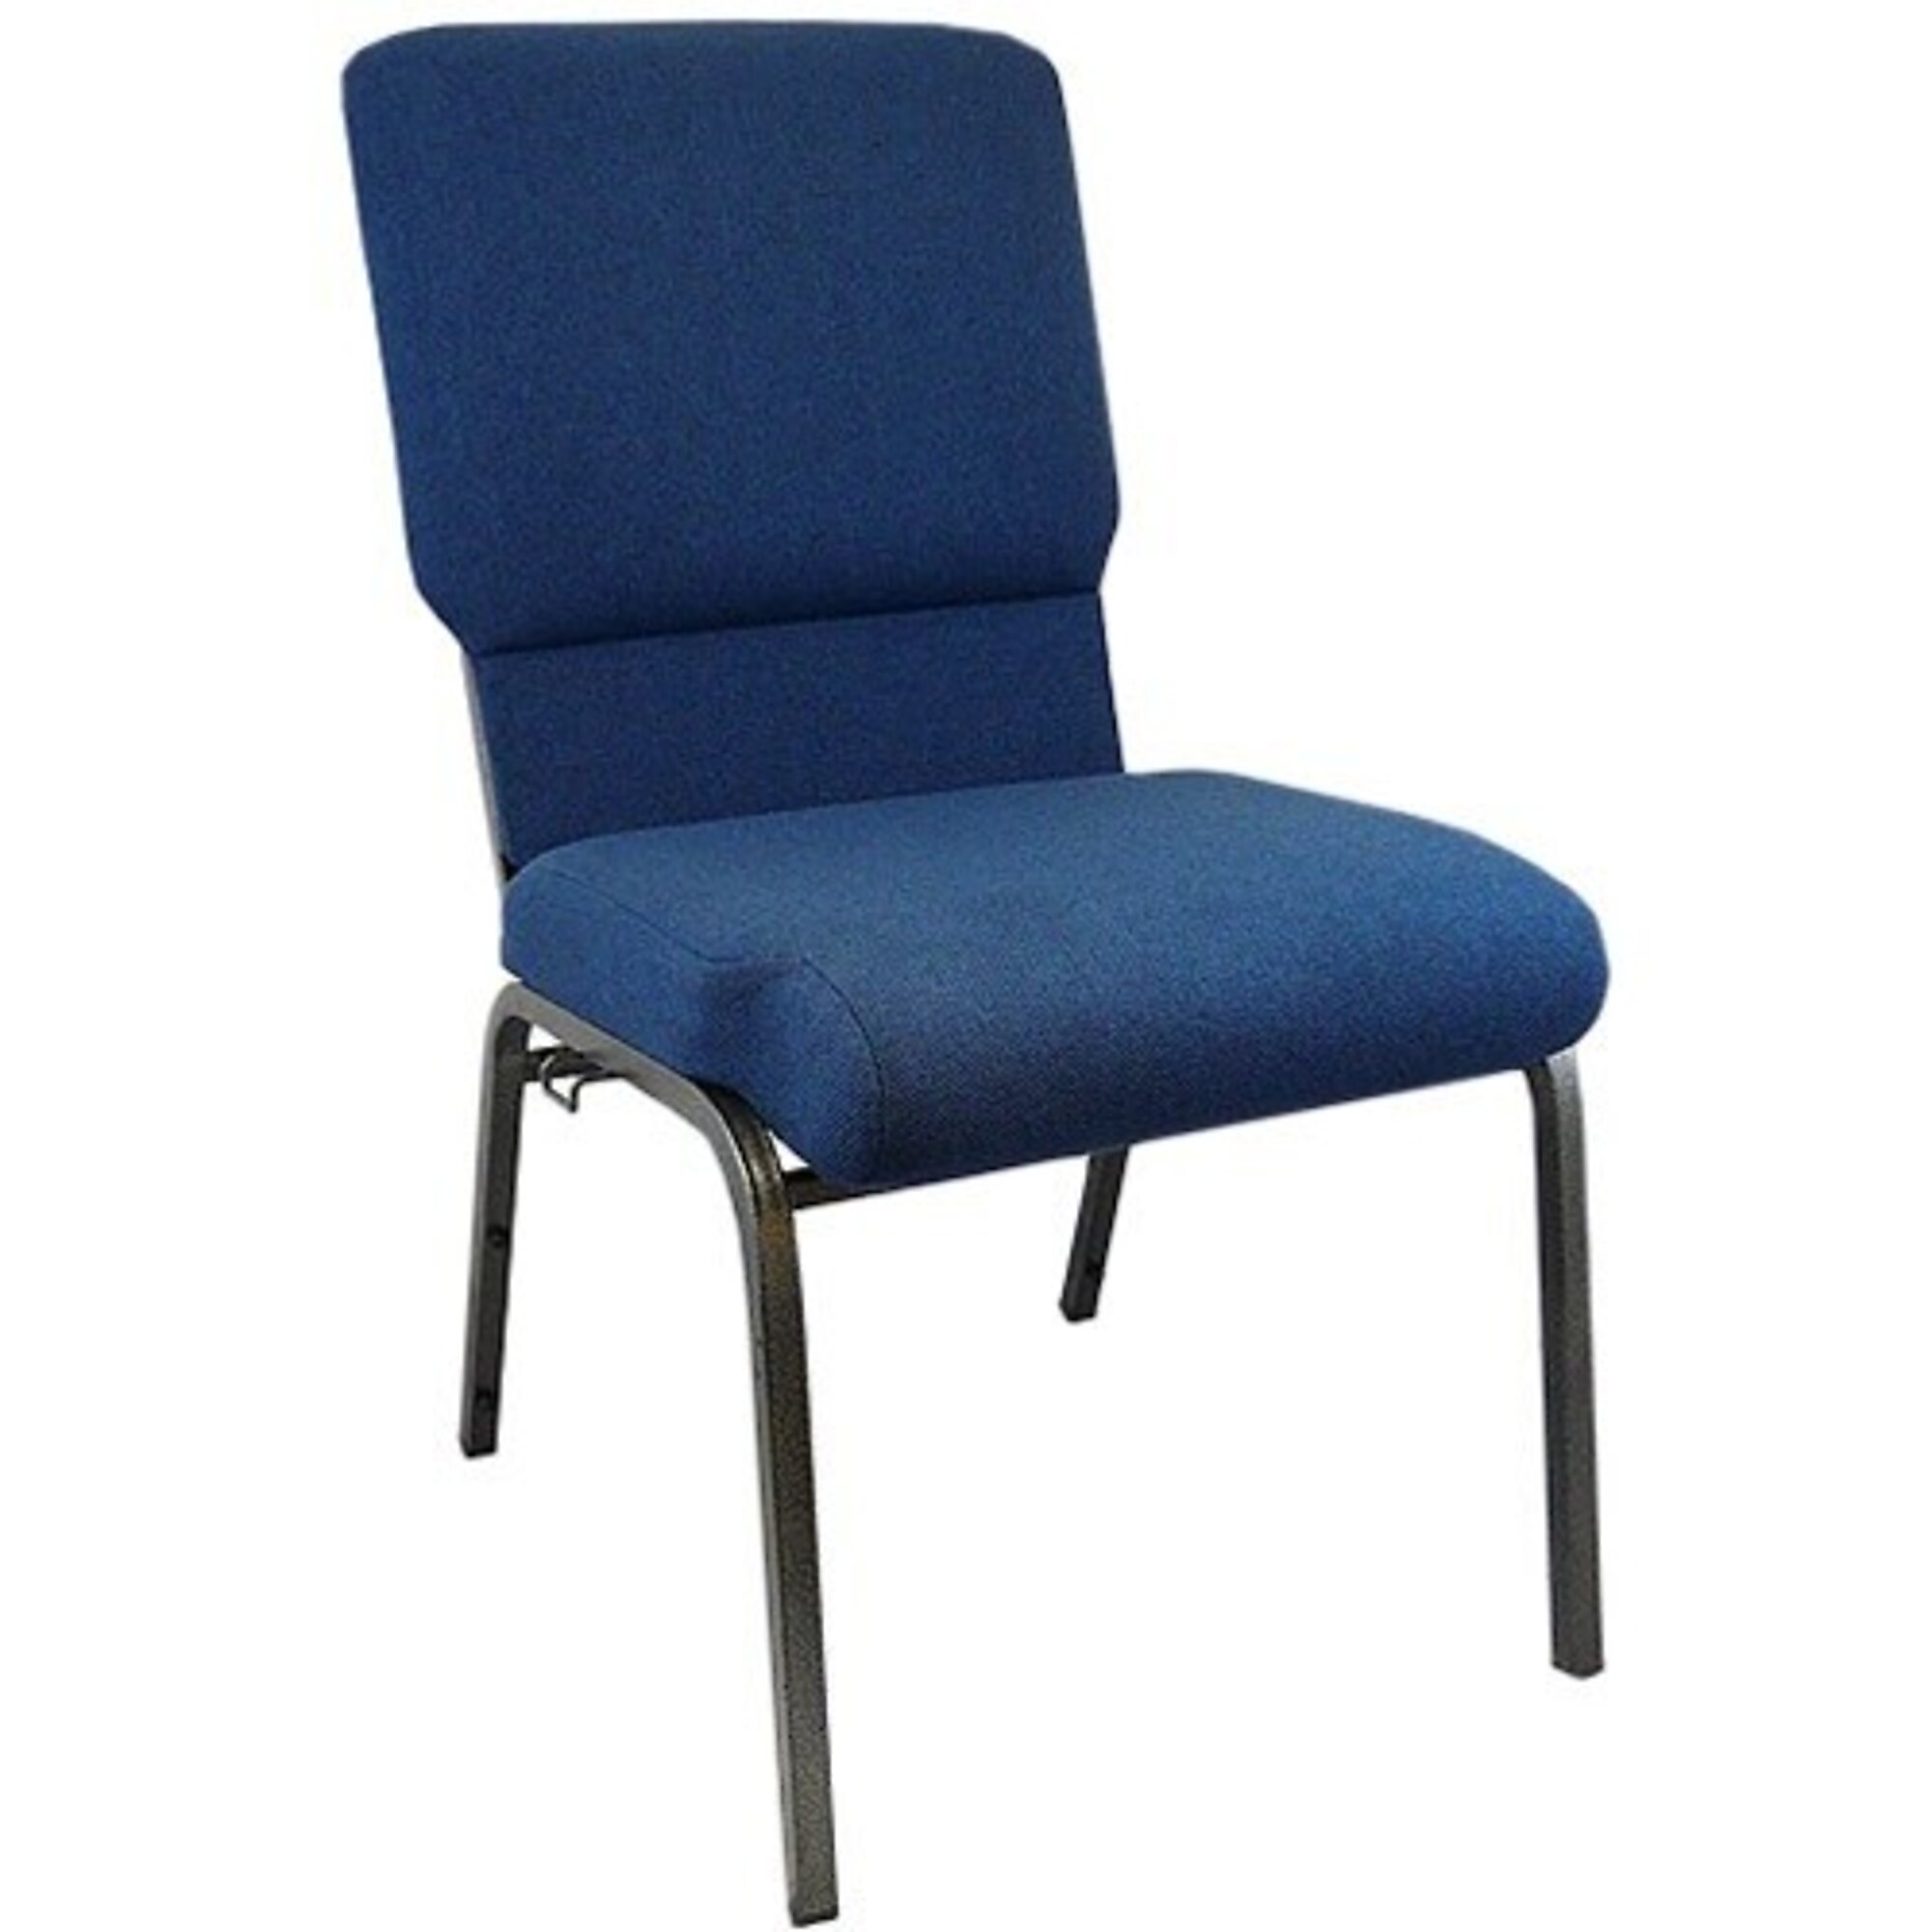 Flash Furniture, Navy Church Chairs 18.5Inch Wide, Primary Color Blue, Included (qty.) 1, Model PCHT185101